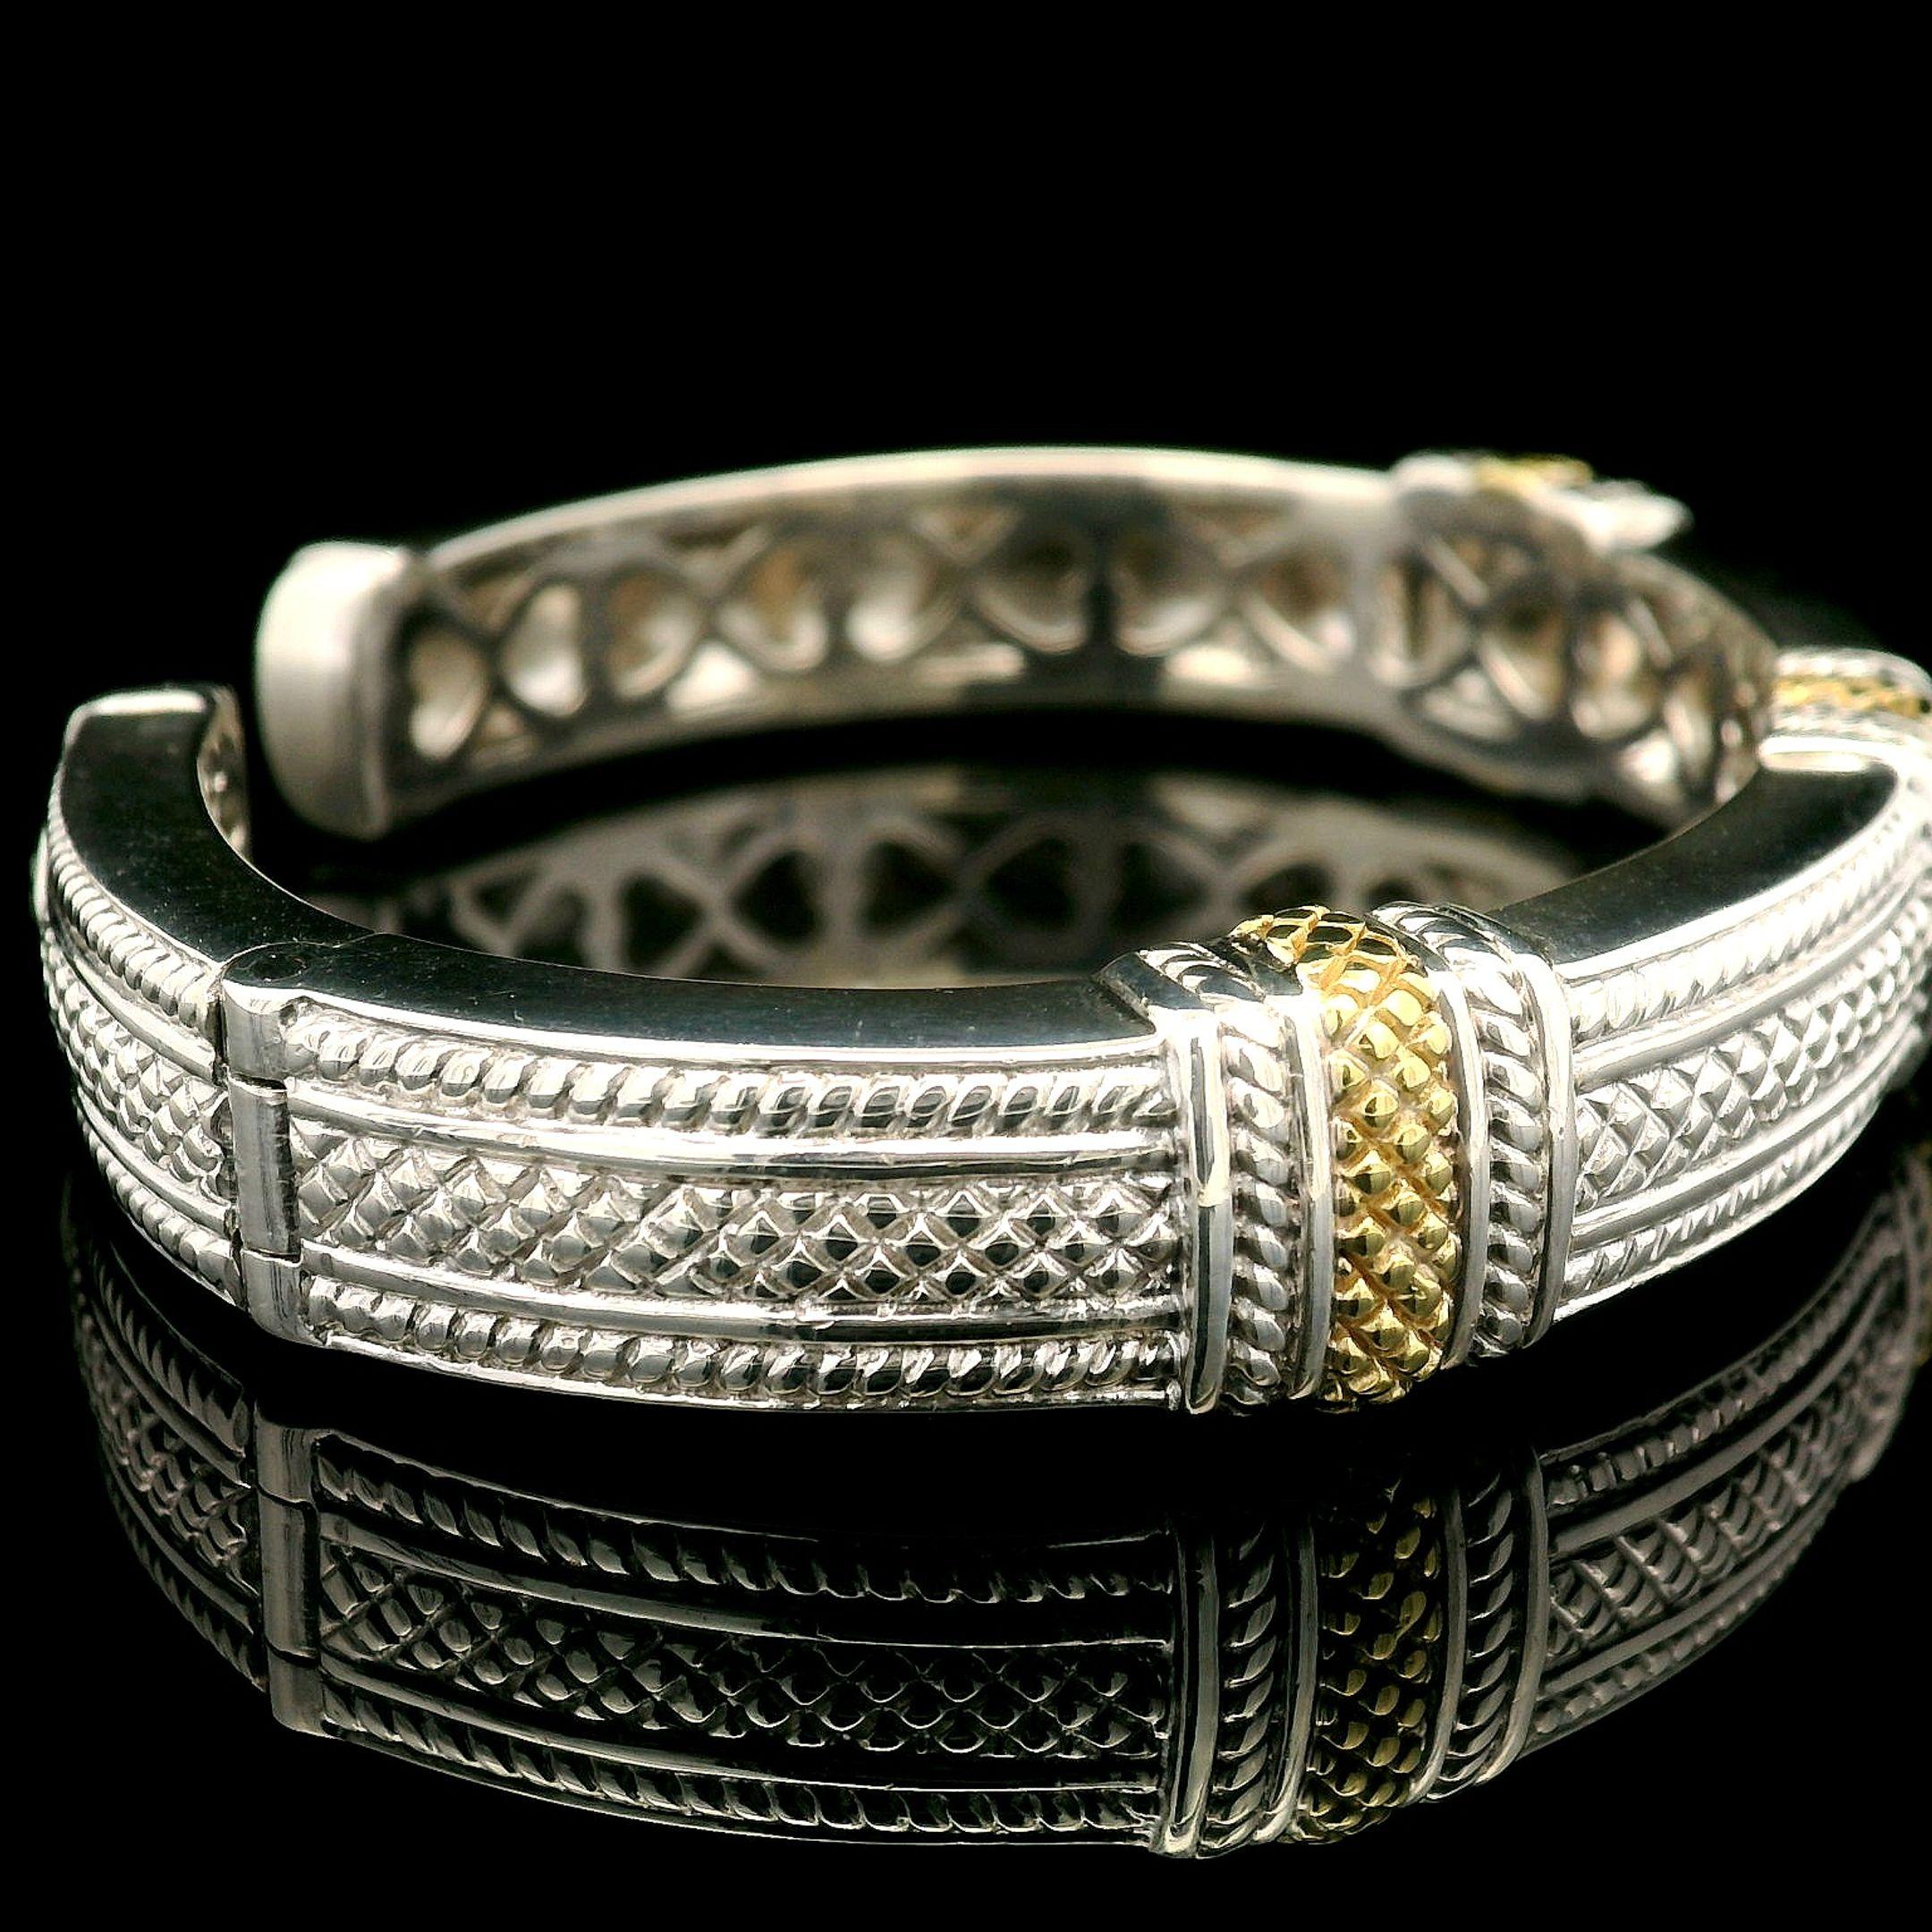 Sterling Silver Diamond Judith Ripka Twisted Rope Design Cuff Bangle Bracelet In Excellent Condition For Sale In Montclair, NJ